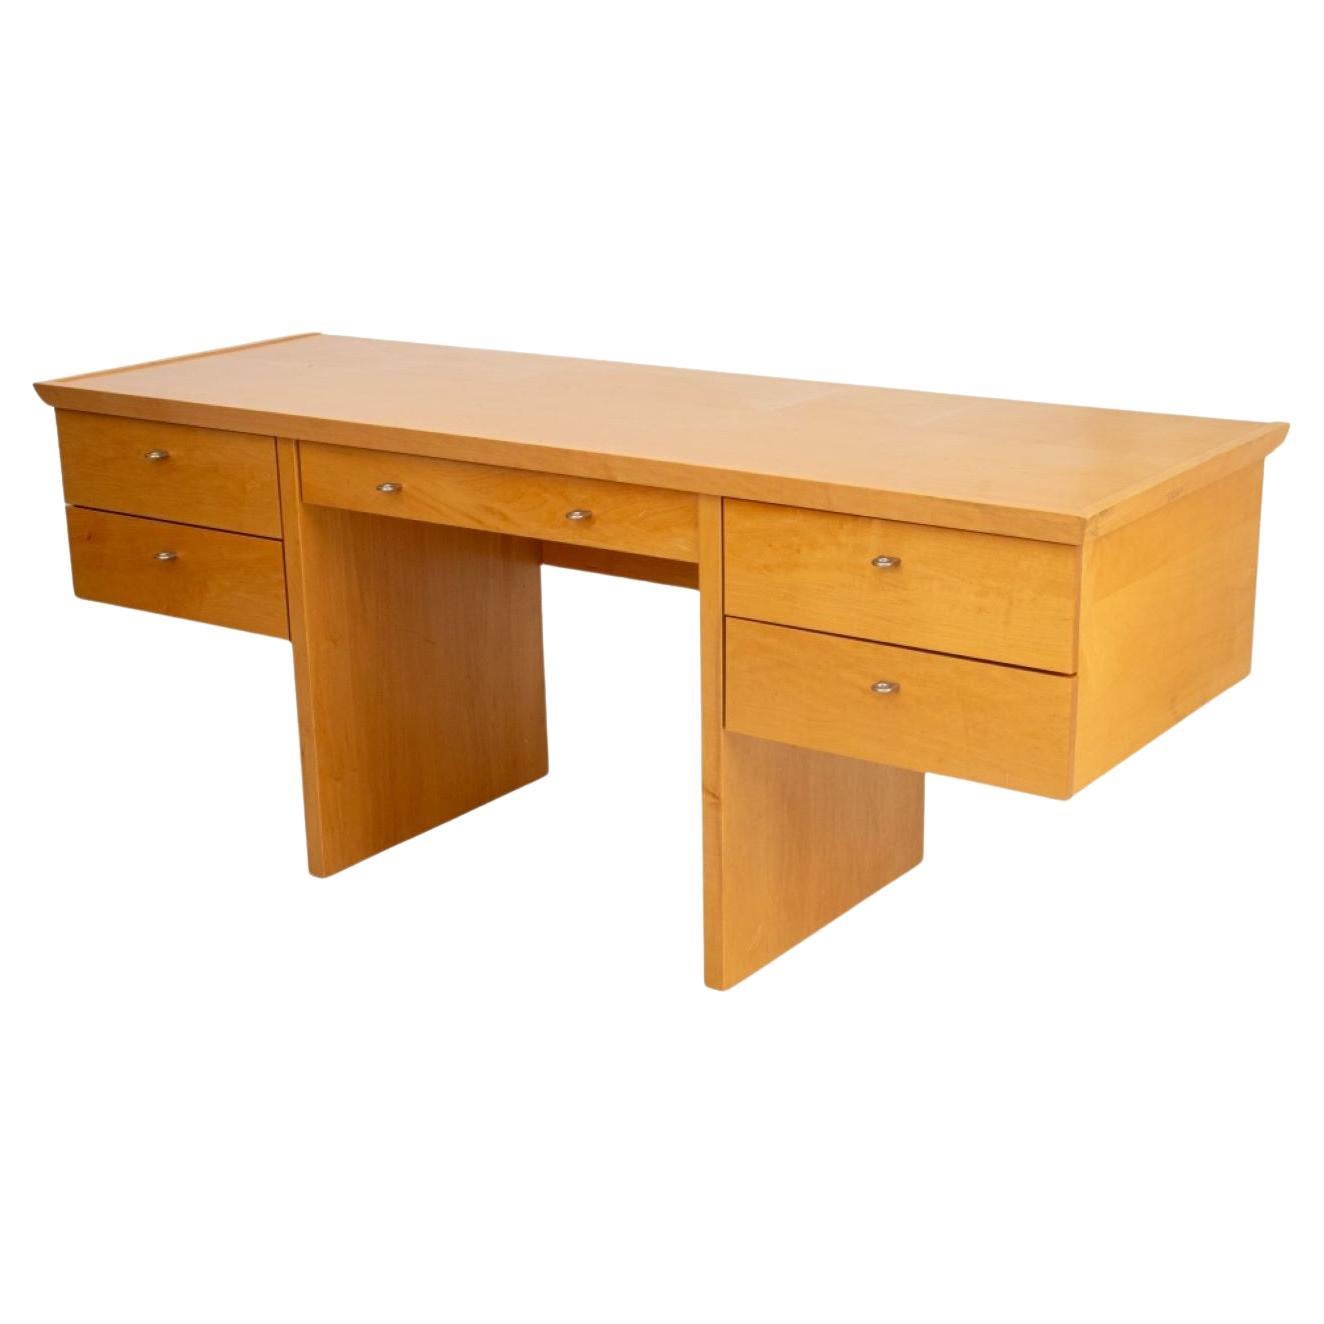 French Modern Style Beech Wood Desk For Sale